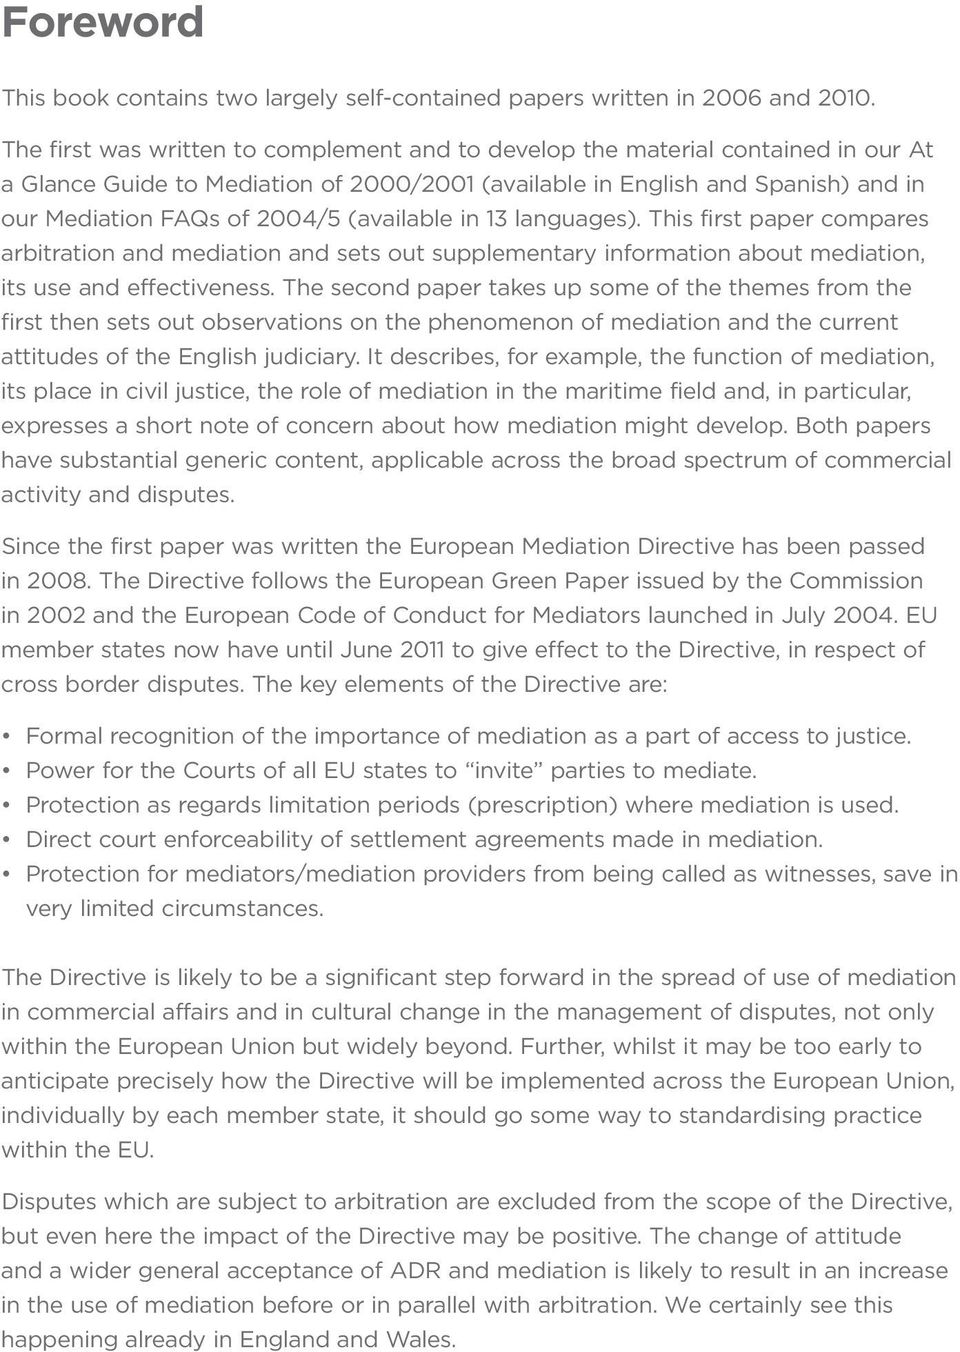 (available in 13 languages). This first paper compares arbitration and mediation and sets out supplementary information about mediation, its use and effectiveness.